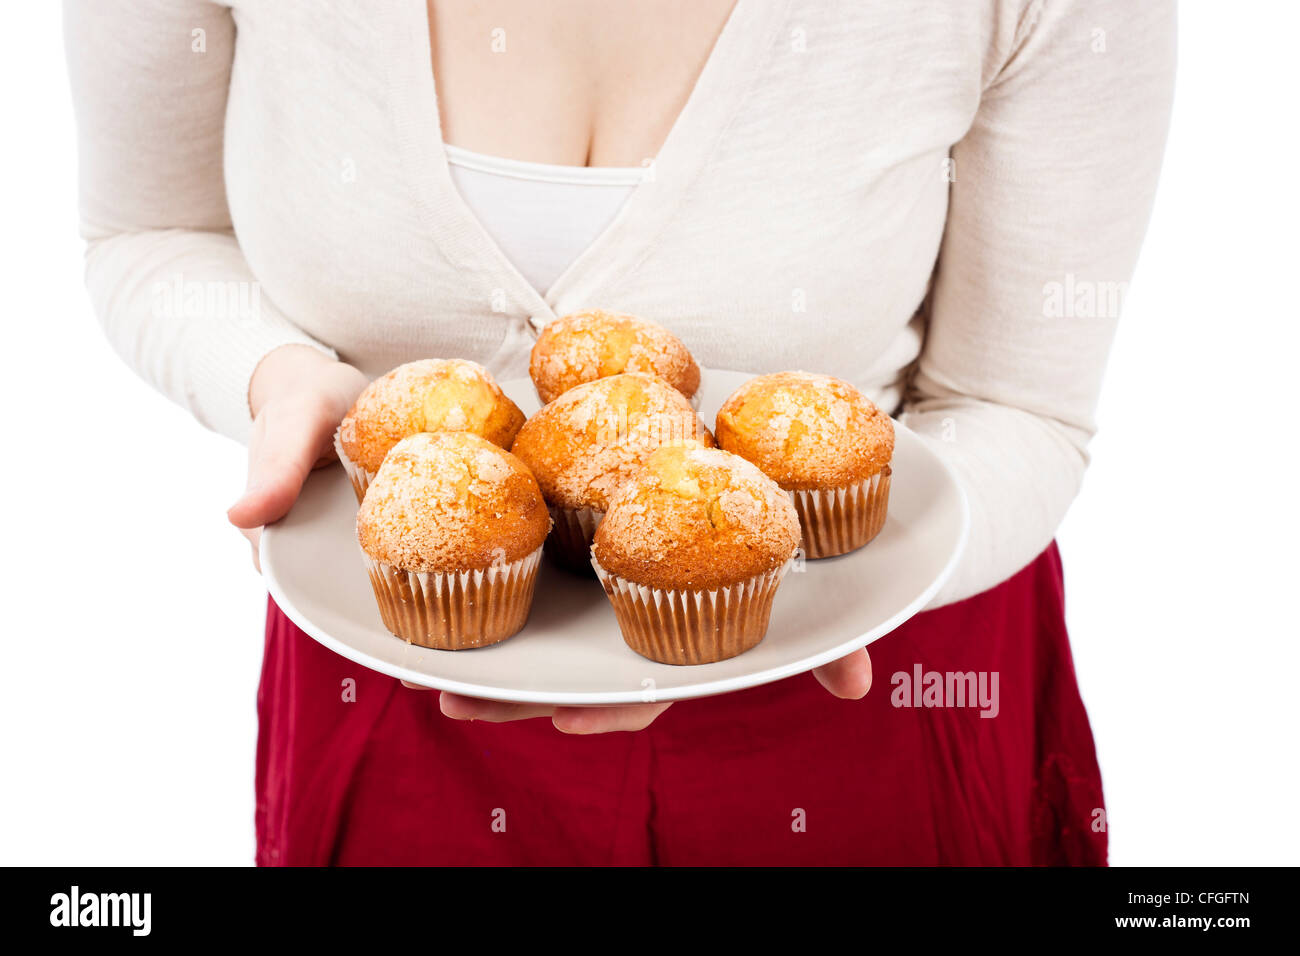 Detail of woman holding plate with fresh muffins, isolated on white background. Stock Photo